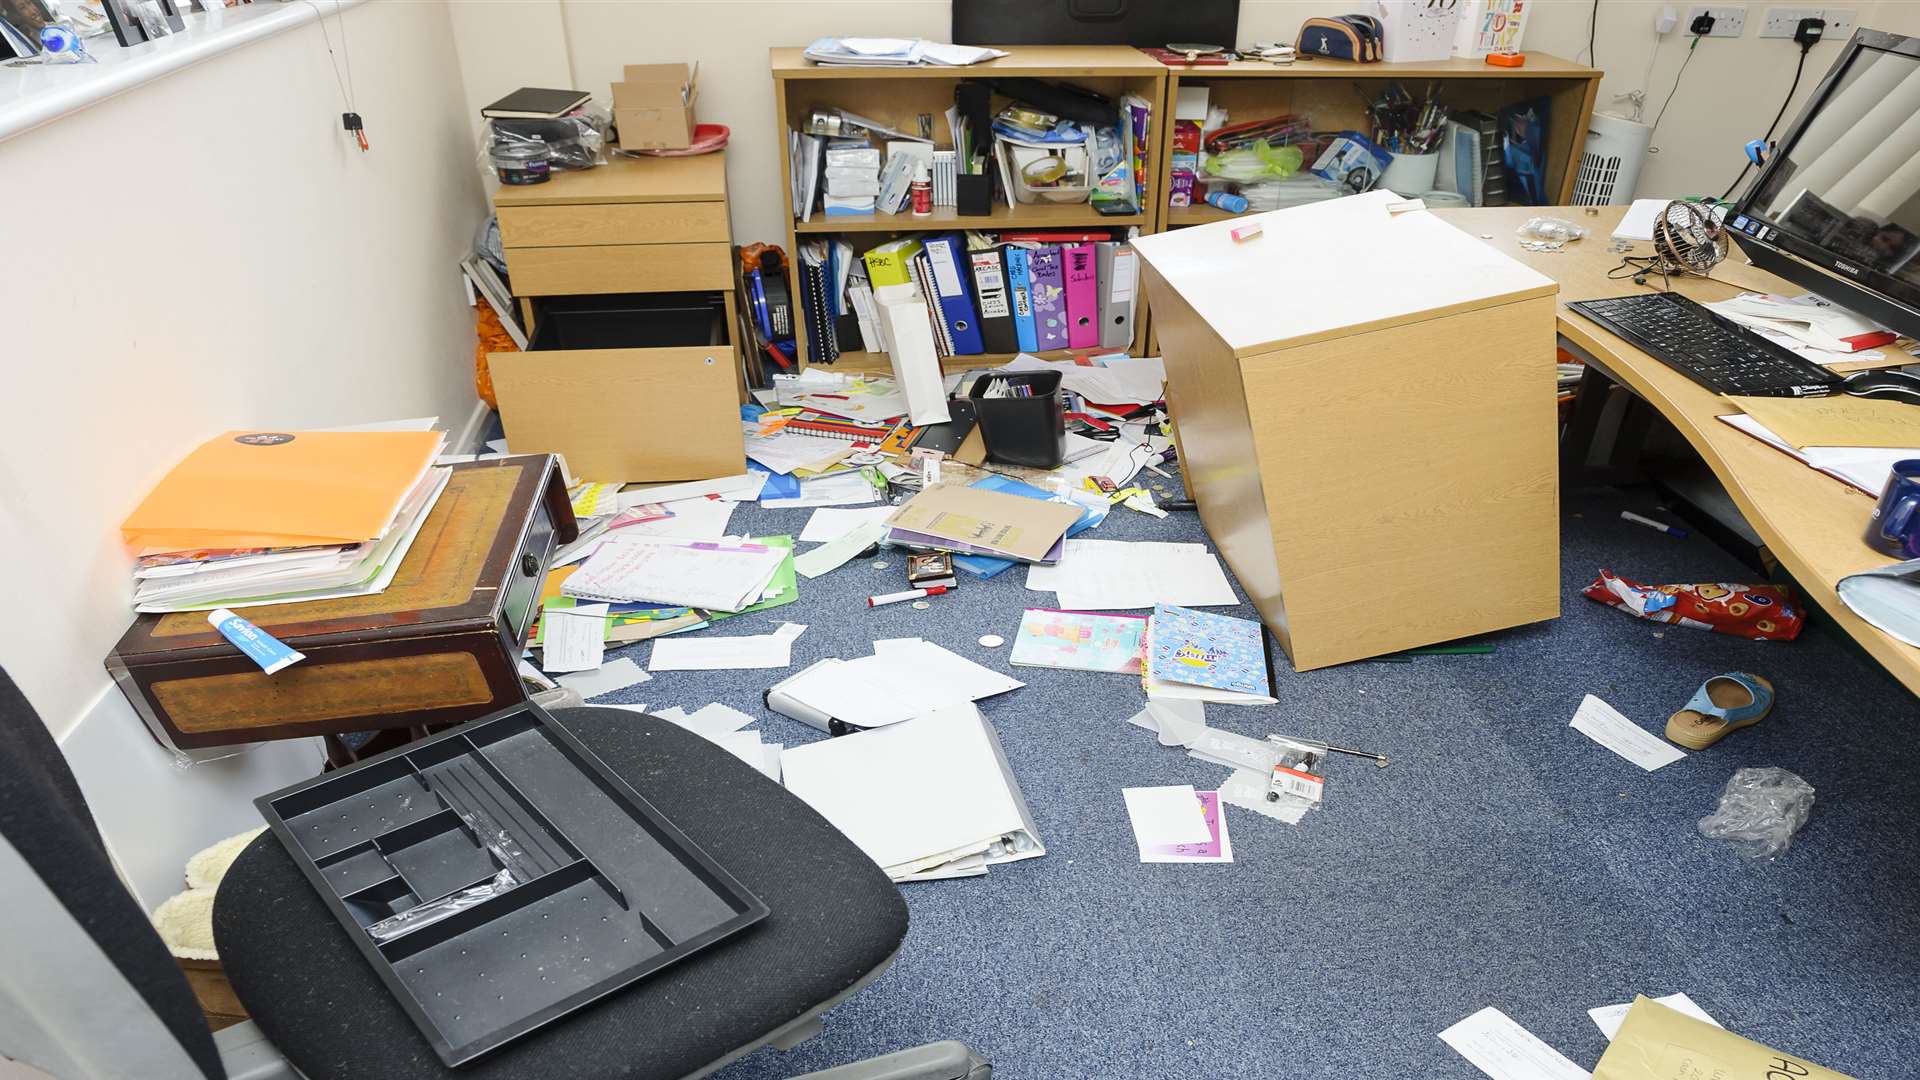 The offices were trashed during the break-in. Picture: Andy Payton